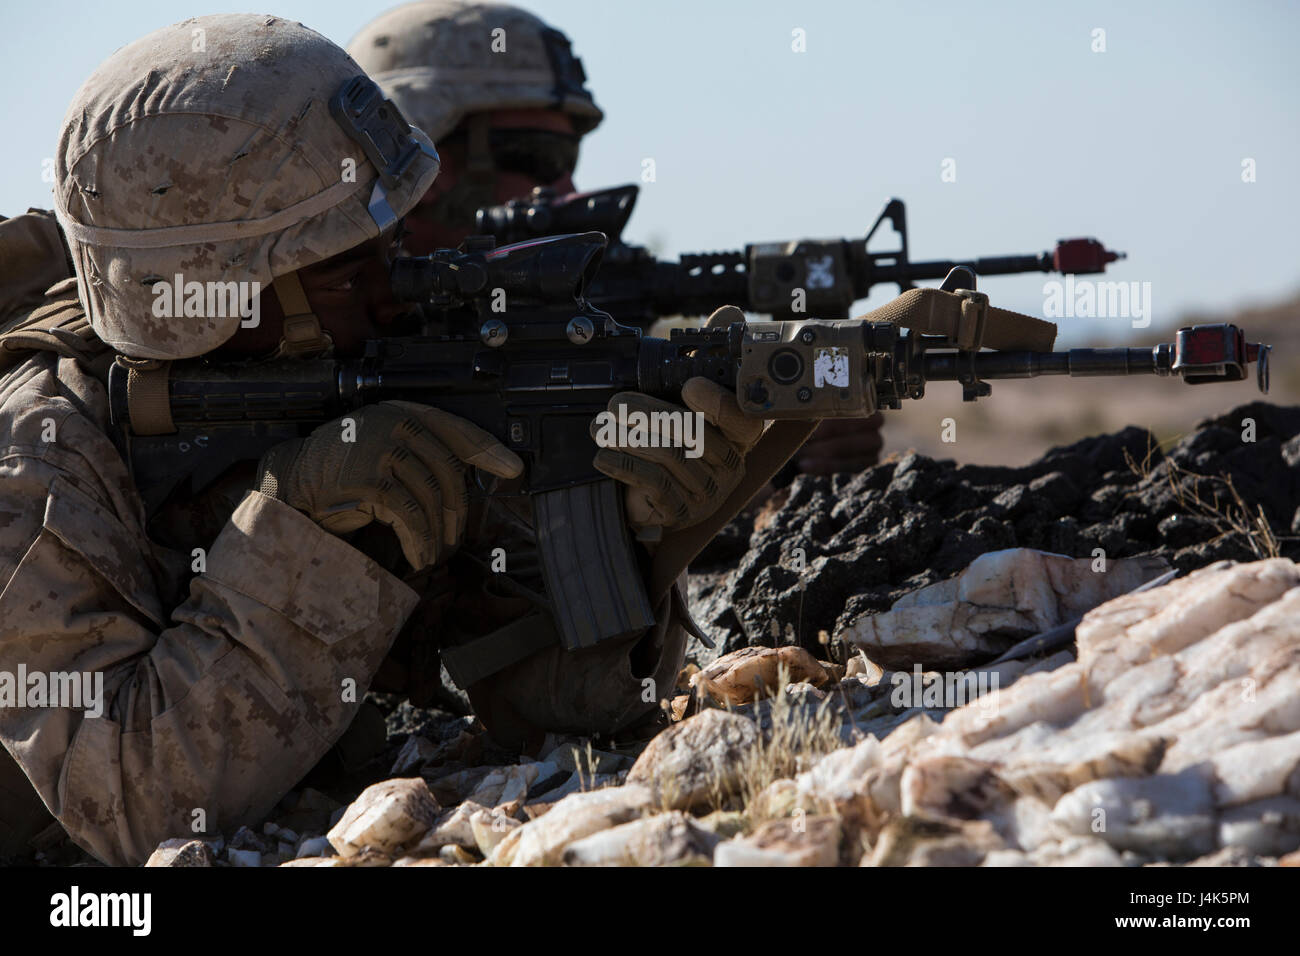 U.S. Marine Corps Pfc. Tahje S. Hodge, a rifleman with Fox Company, 2nd Battalion, 6th Marine Regiment, 2nd Marine Division (2d MARDIV), sights in on his M4A1 Carbine rifle during a battalion-level defensive position for Talon Exercise (TalonEx) 2-17, Yuma, A.Z., April 18, 2017. The purpose of TalonEx was for ground combat units to conduct integrated training in support of the Weapons and Tactics Instructor Course (WTI) 2-17 hosted by Marine Aviation Weapons and Tactics Squadron One (MAWTS-1). Stock Photo